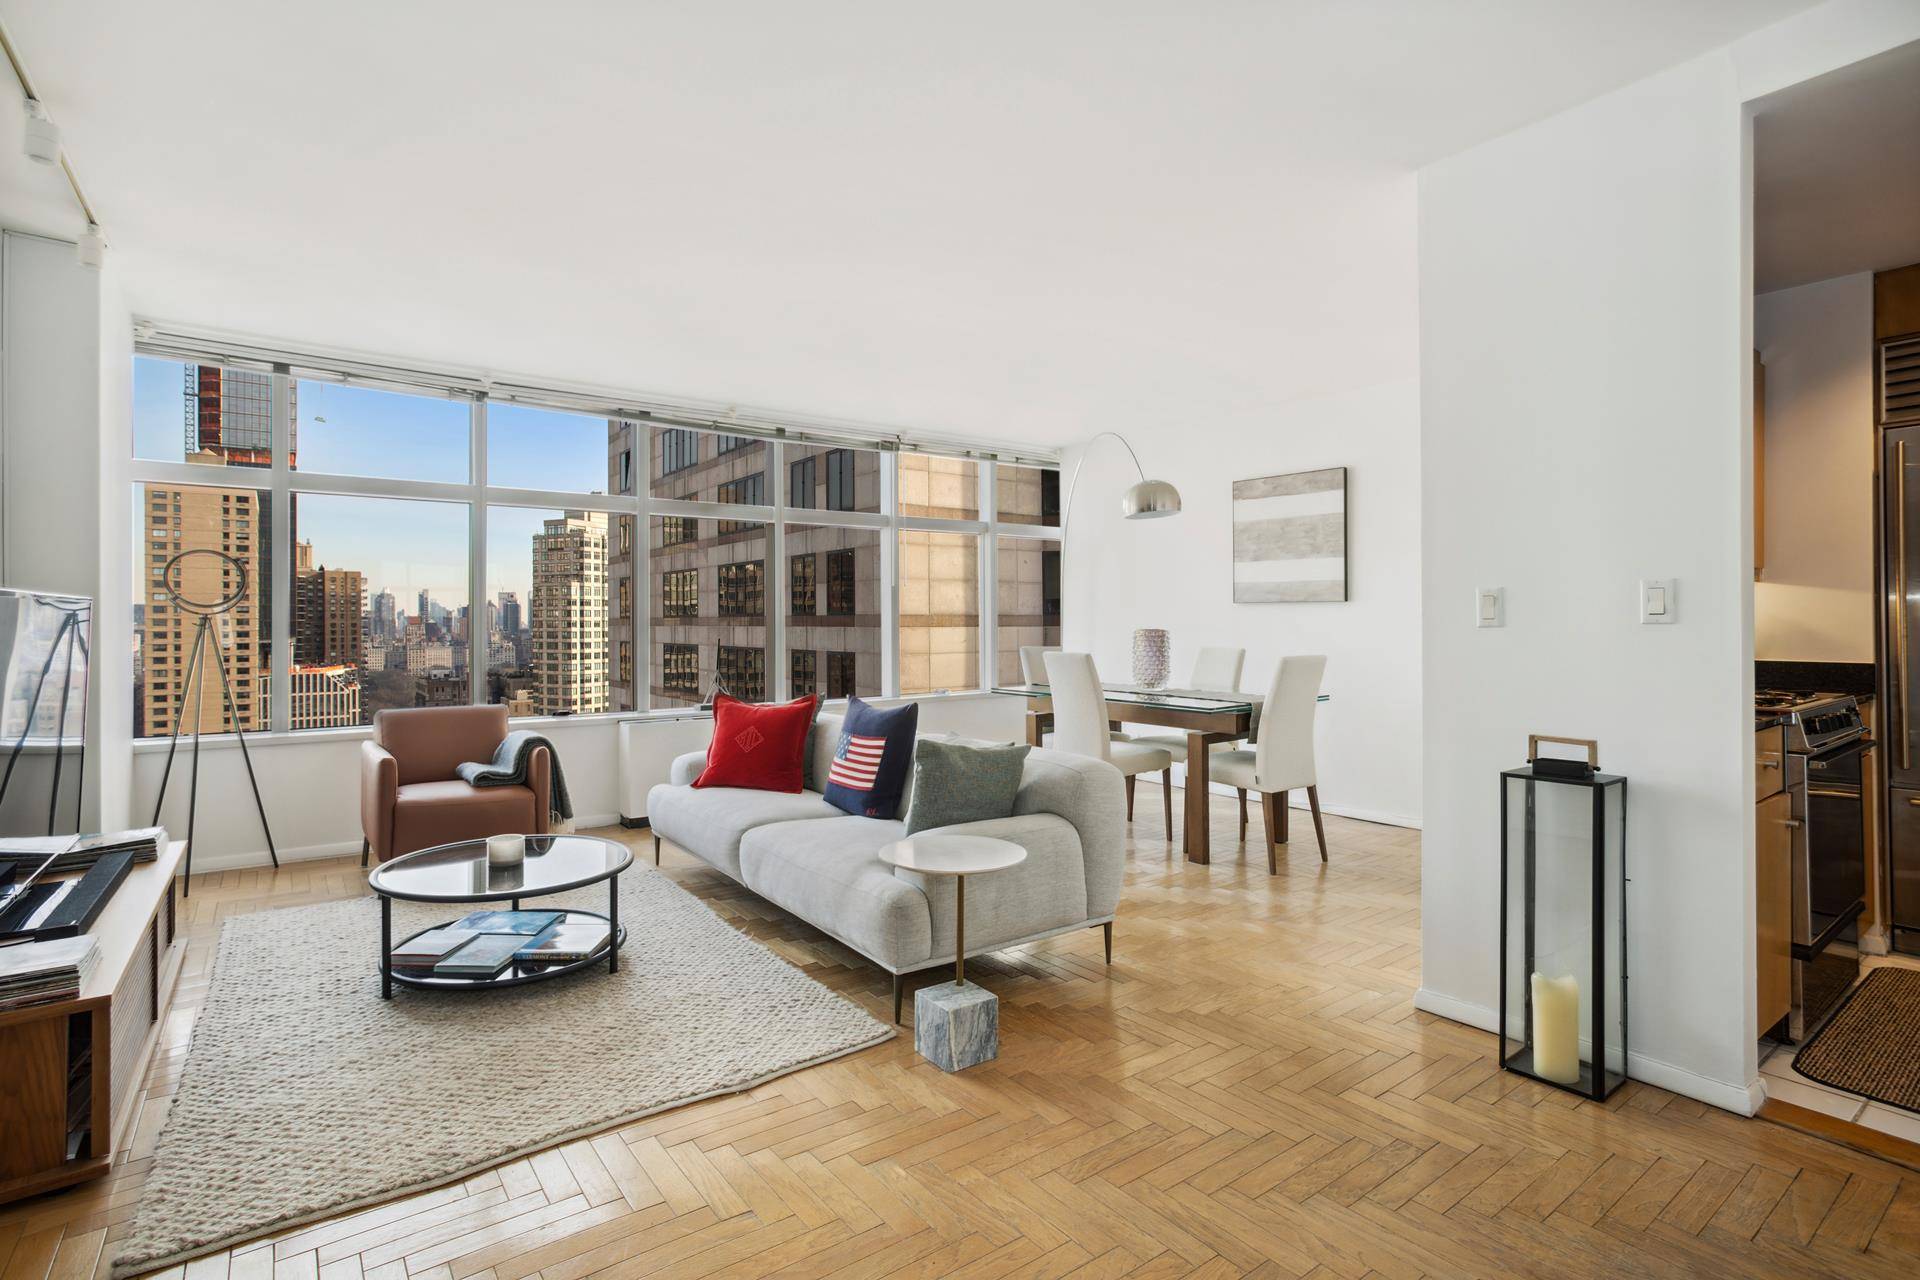 Welcome to 3 Lincoln Center a white glove, full service high end luxury condo located on 66th street off Broadway adjacent to the Lincoln Center for the Performing Arts and ...